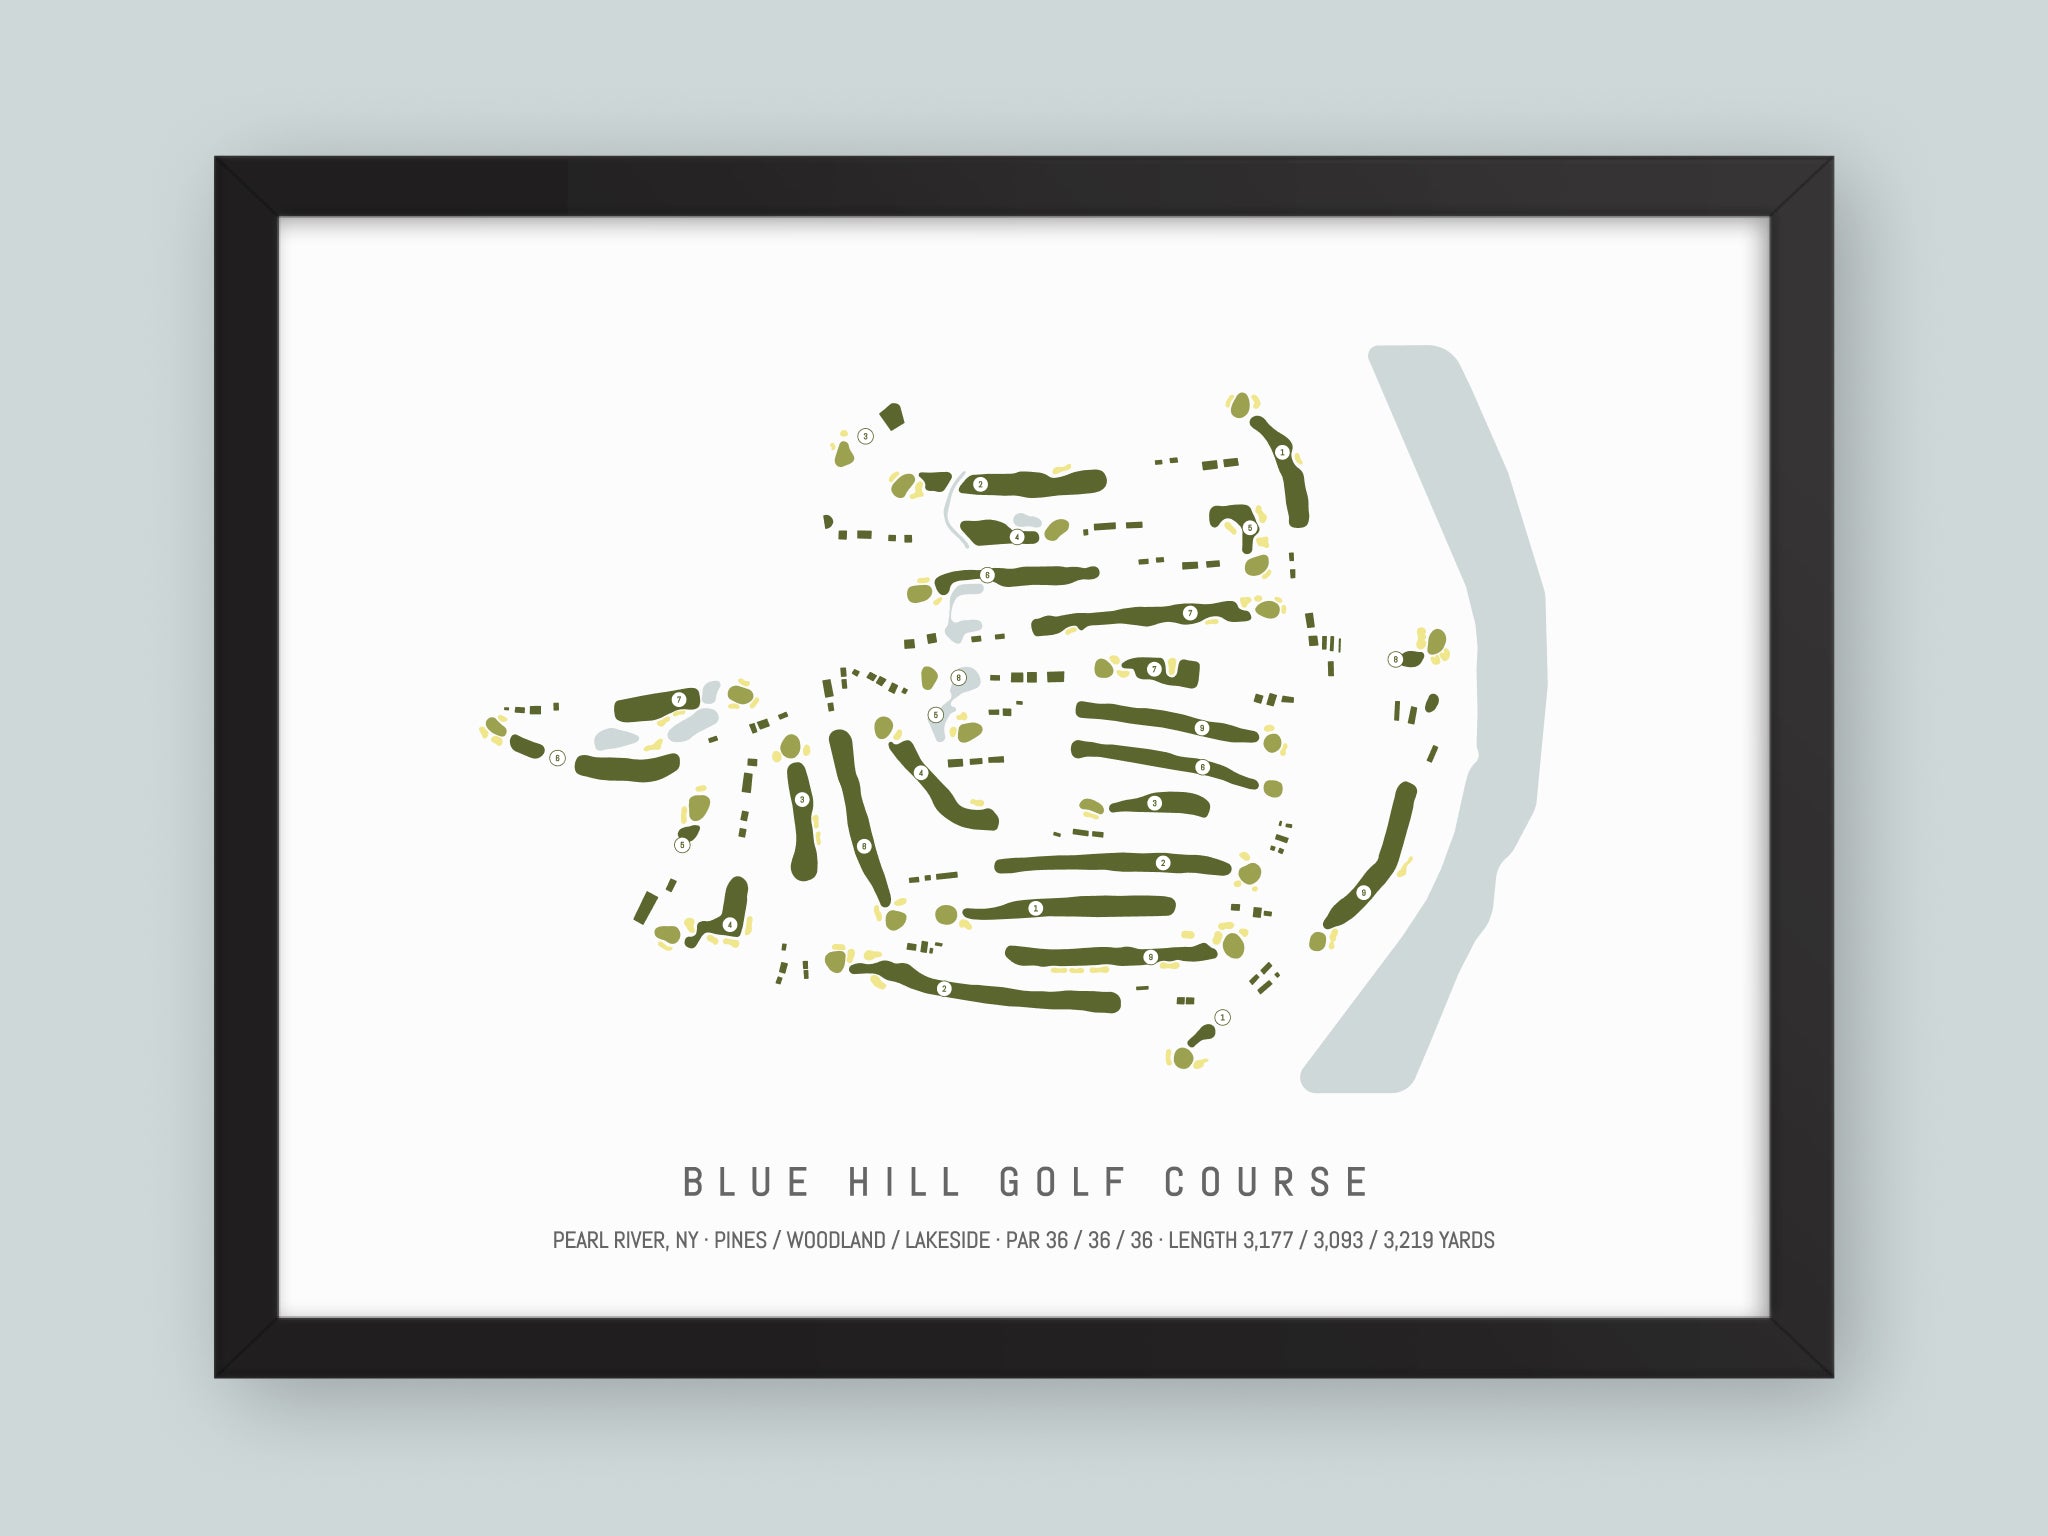 Blue-Hill-Golf-Course-NY--Black-Frame-24x18-With-Hole-Numbers